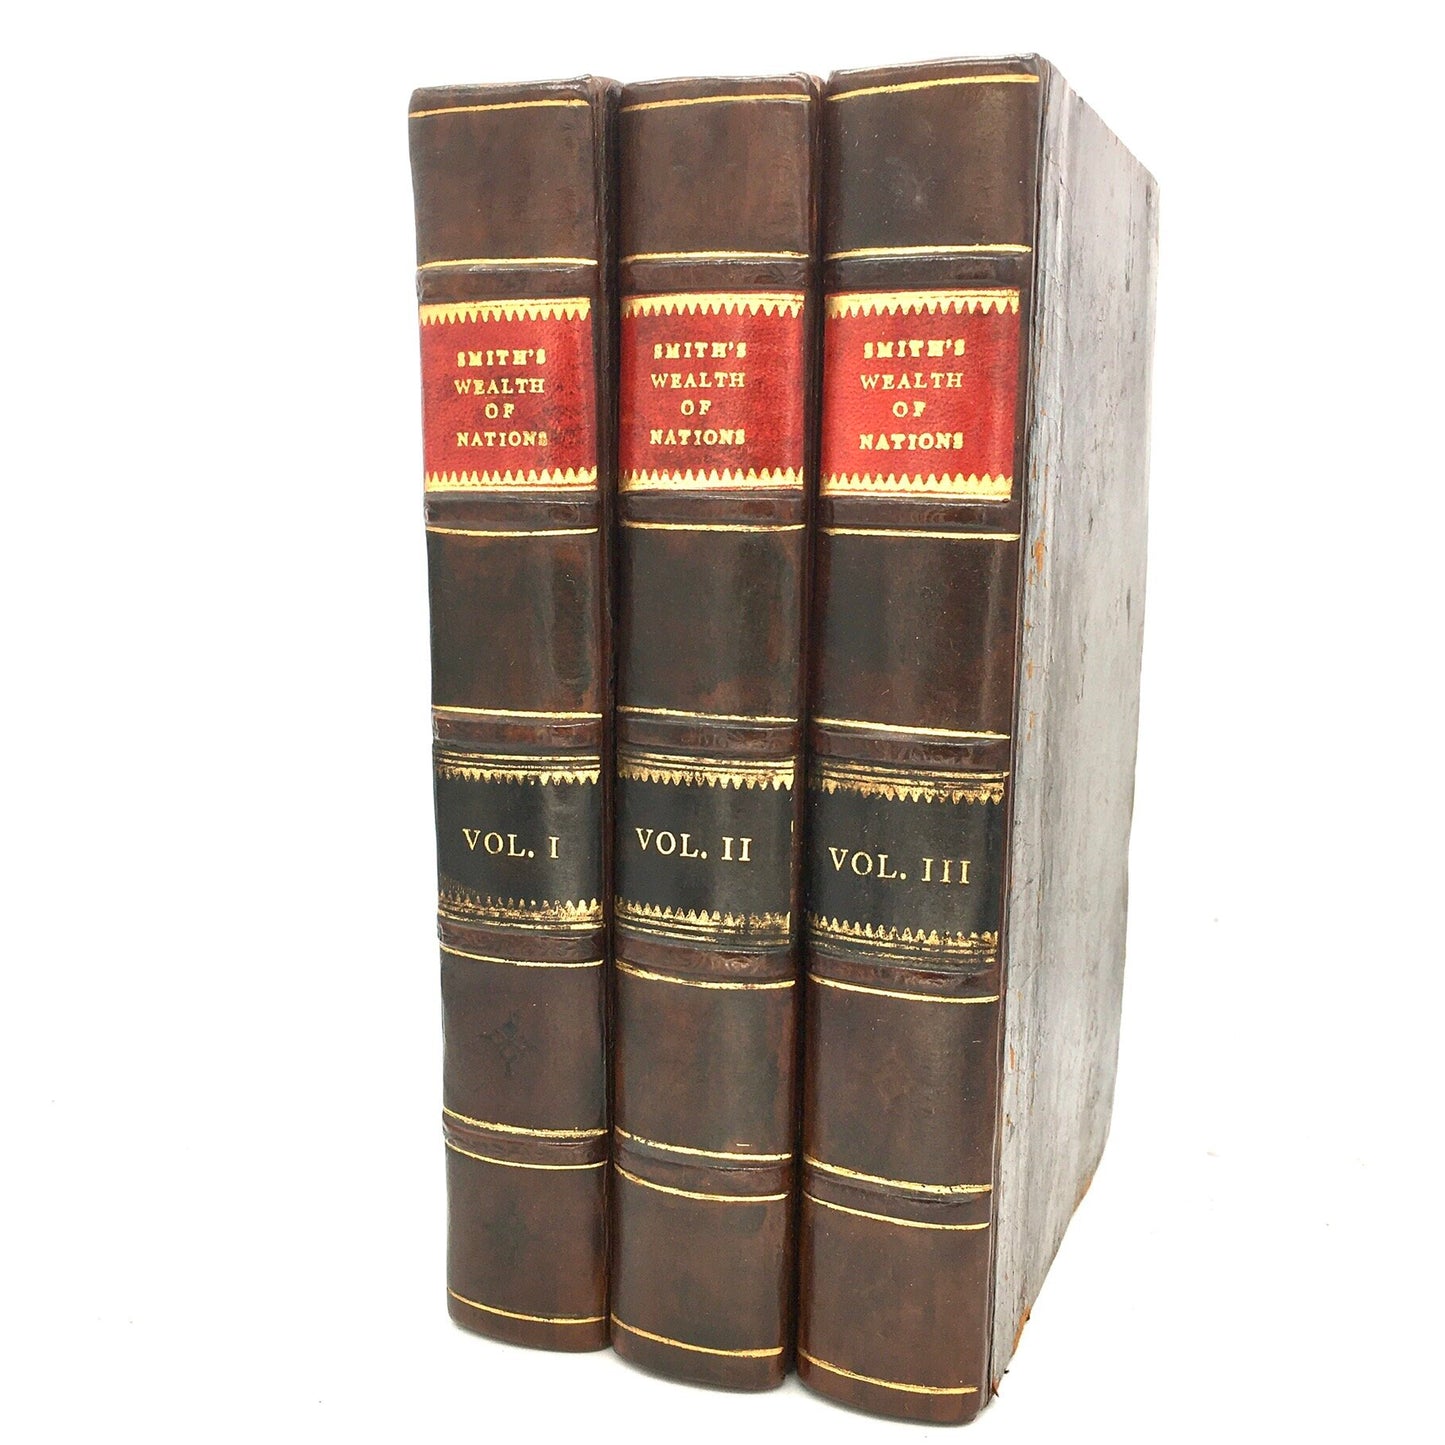 SMITH, Adam "An Inquiry into the Nature and Causes of the Wealth of Nations" [London: 1812] - Buzz Bookstore